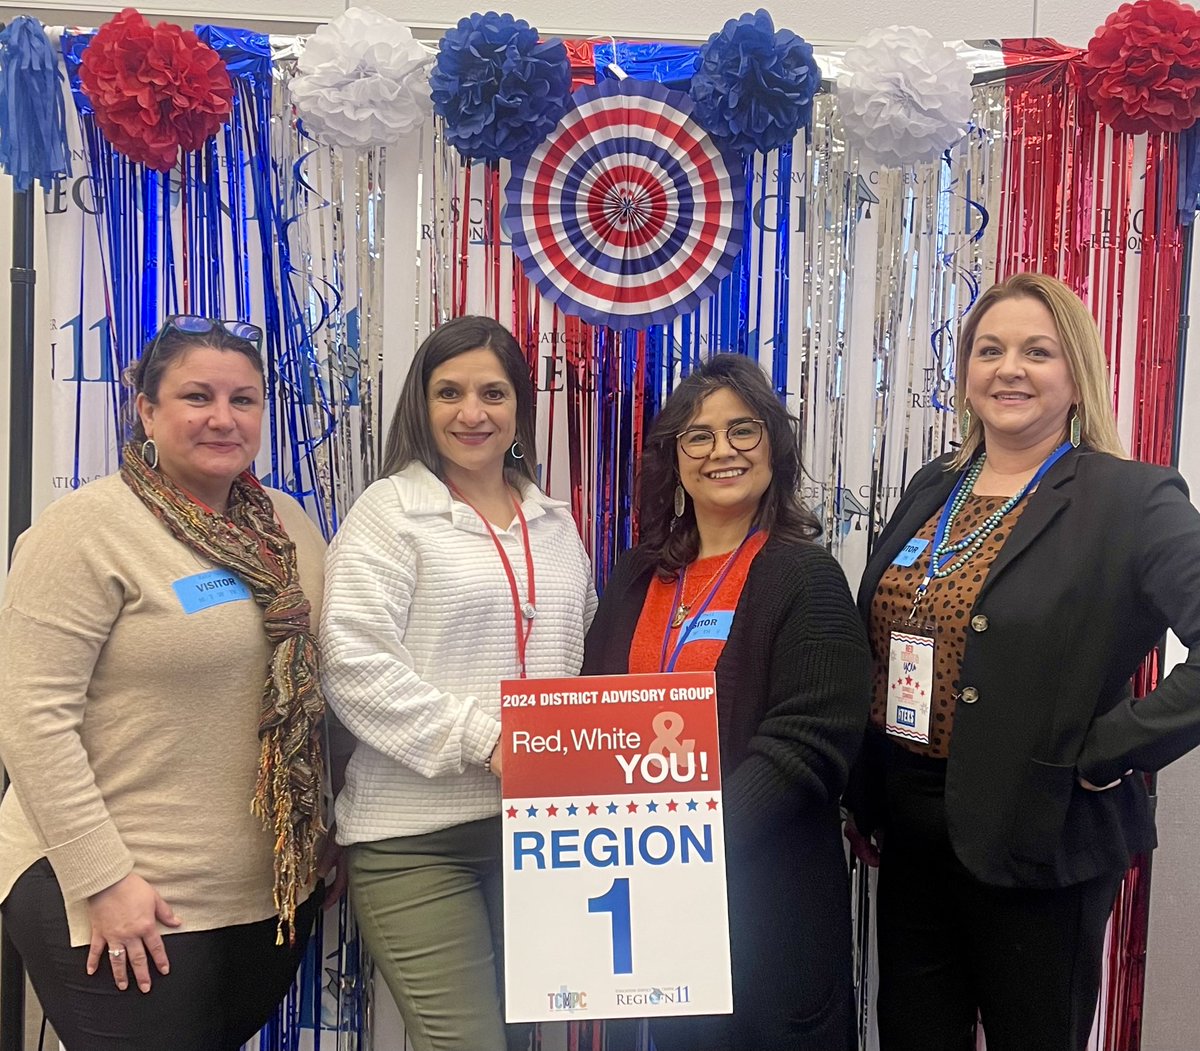 😁 Region One representing! Thanks to @LaFeriaISD and @ZapataCISD for joining us in Fort Worth for the #TEKS Resource System District Advisory Group Conference. #RegionOneLeads @TEKS_RS